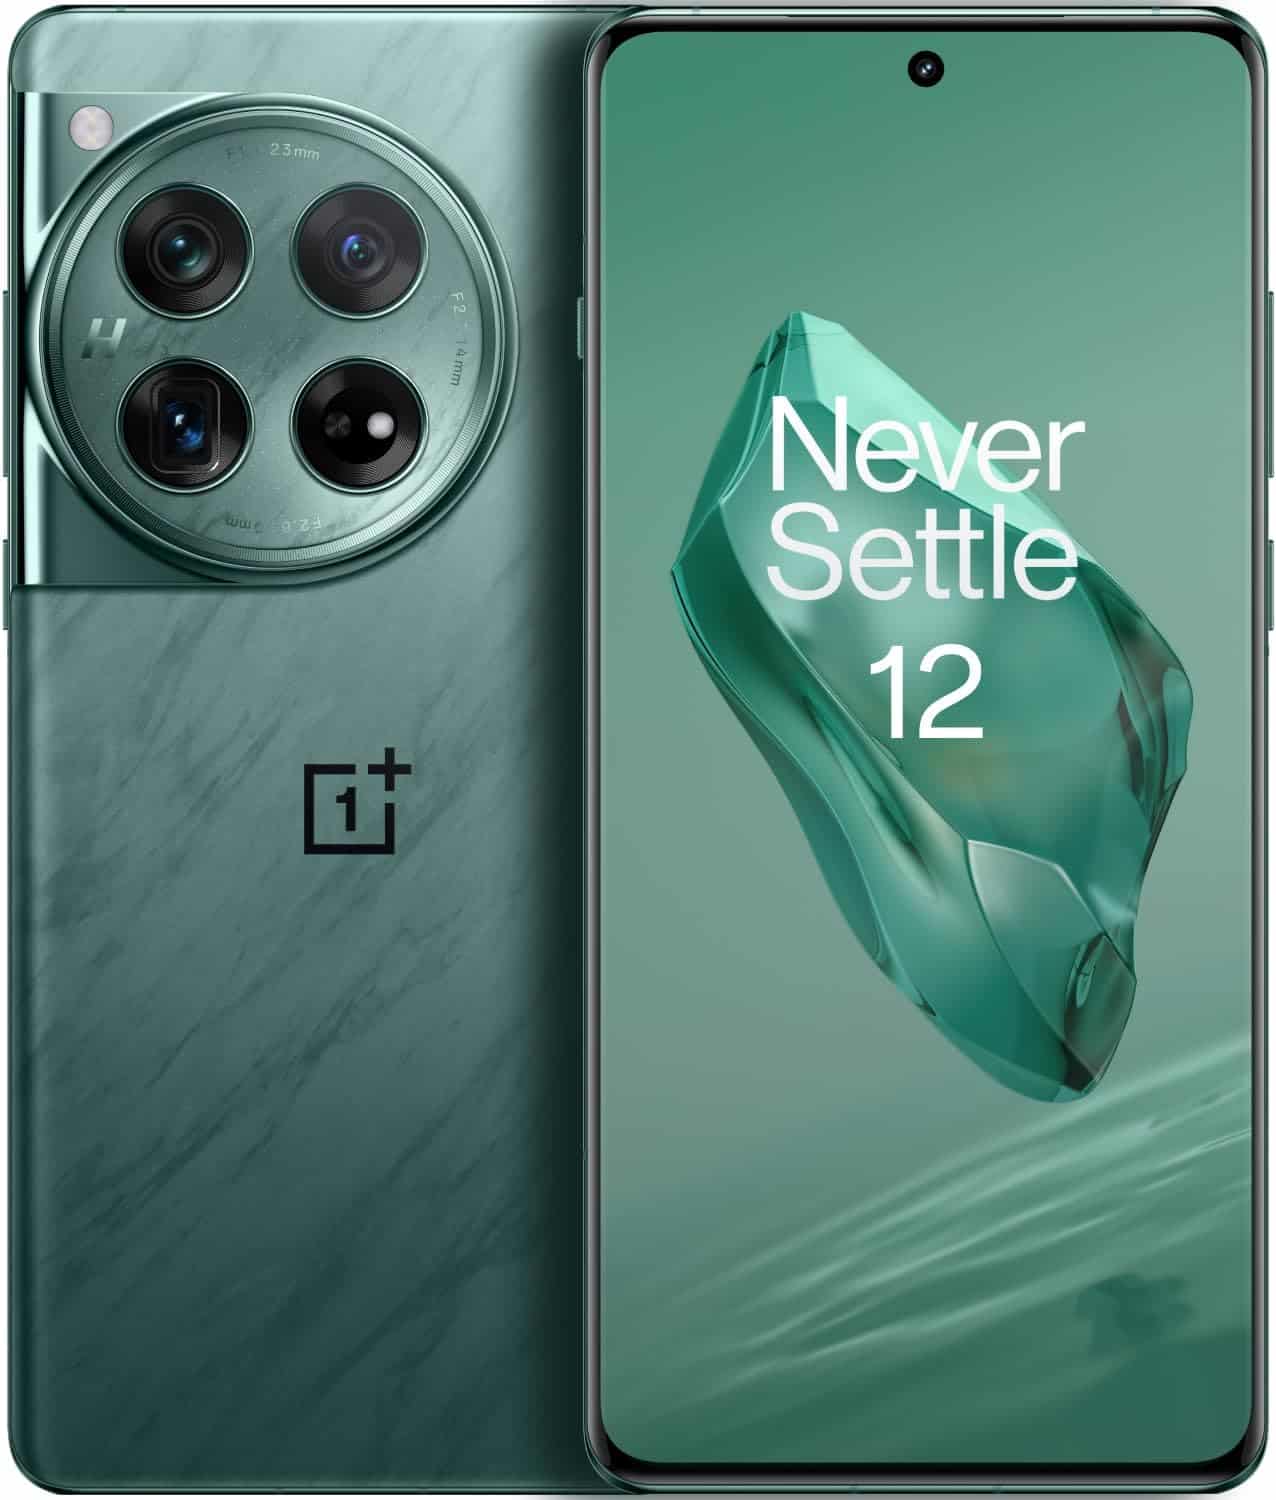 The OnePlus 12 is shown with a camera and two lenses.